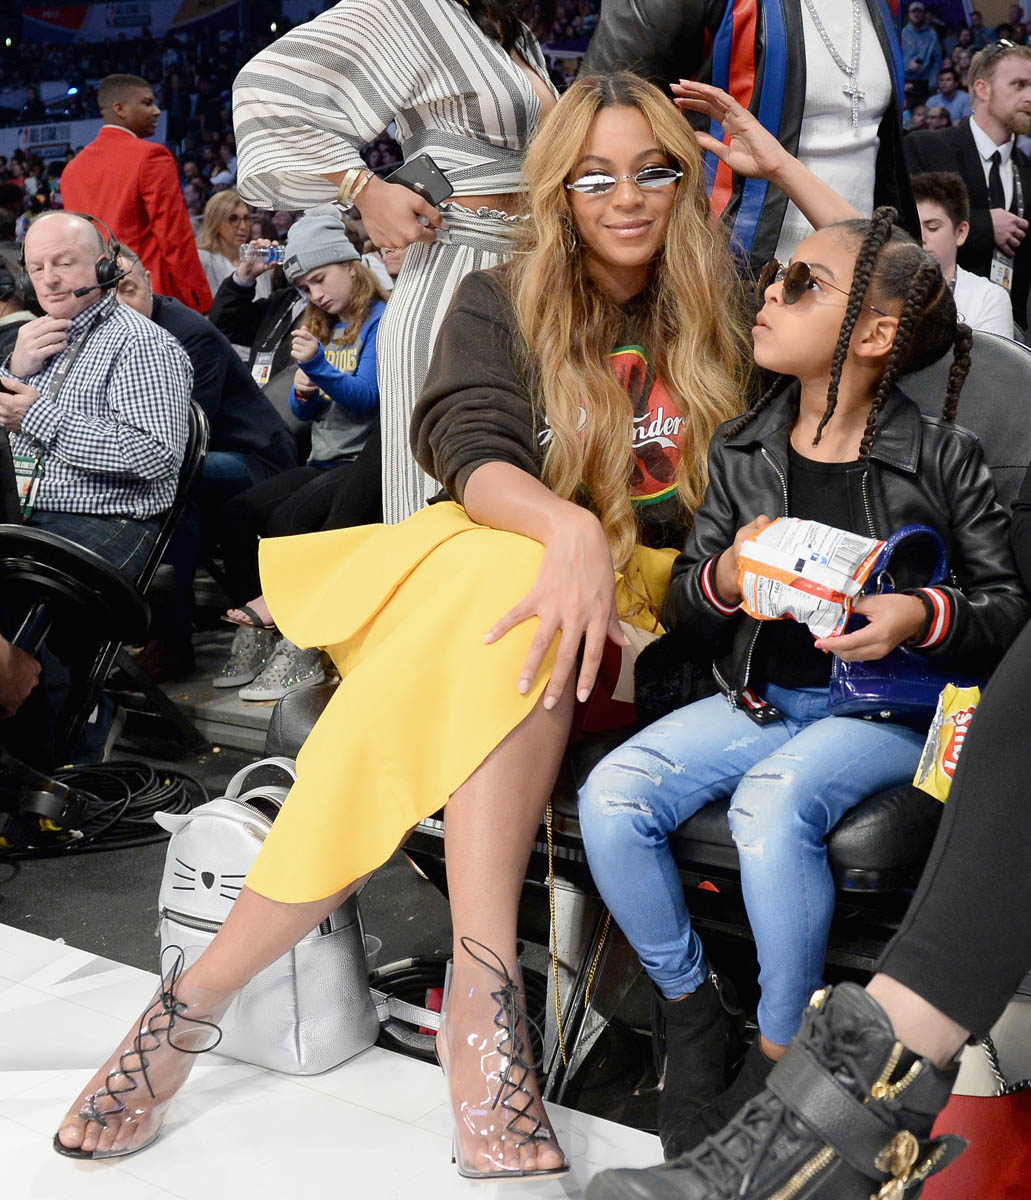 Blue Ivy Carter and Beyoncé sit courtside at the NBA All-Star game